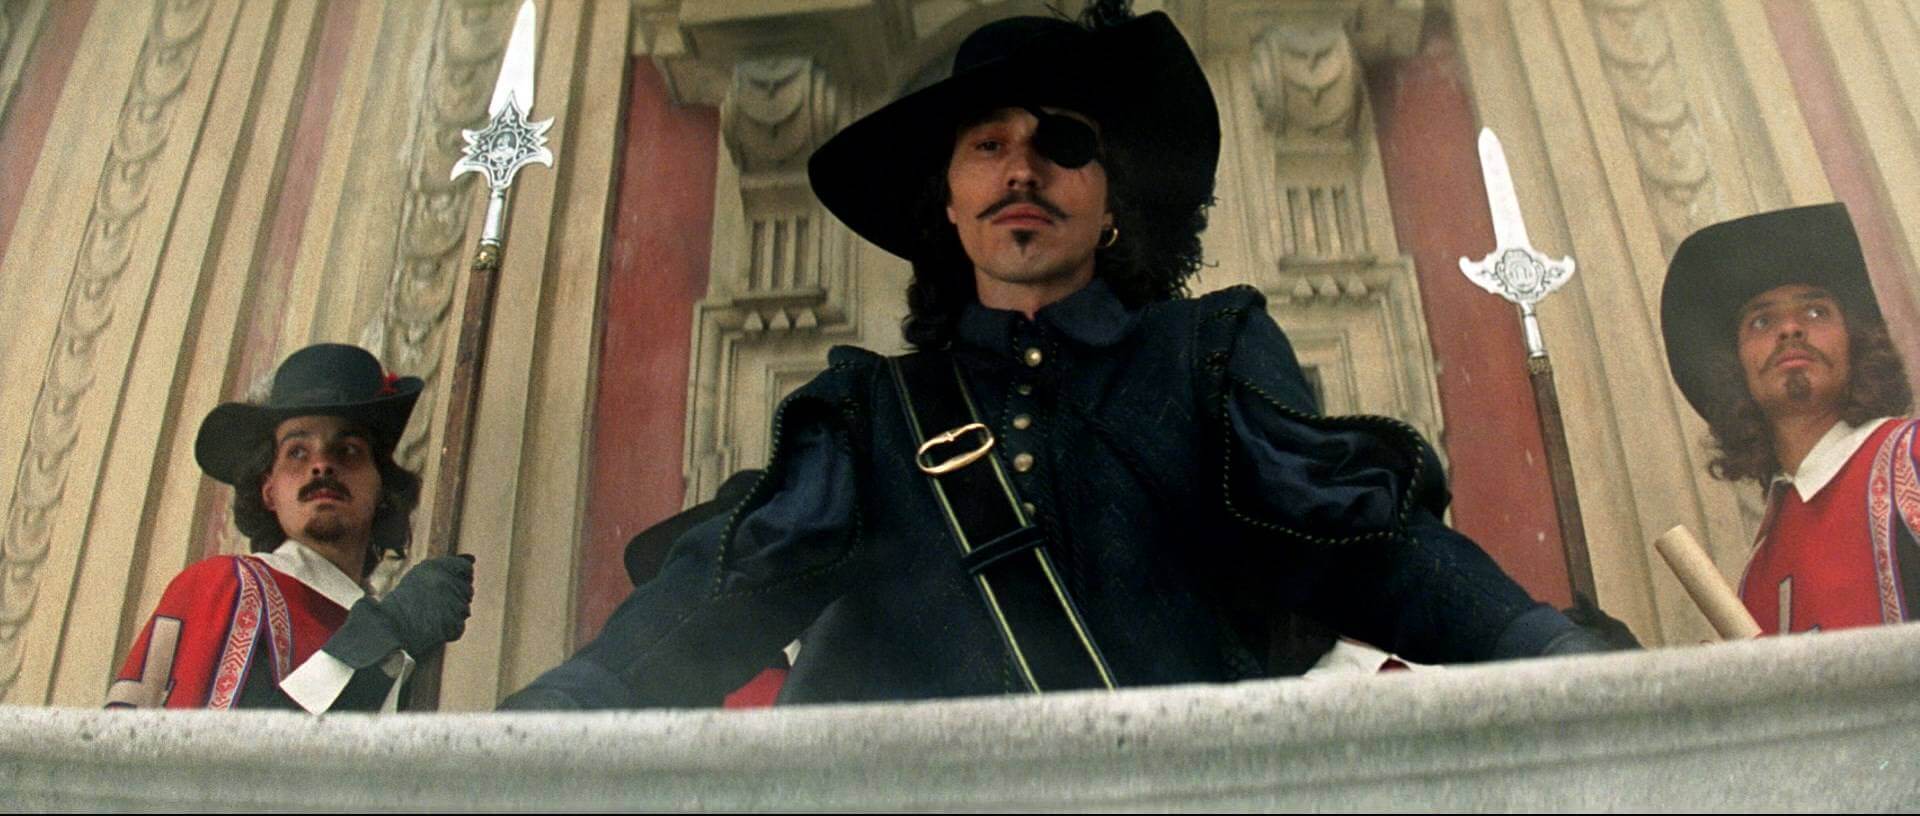 The-Three-Musketeers-(1993)-in-Netherlands